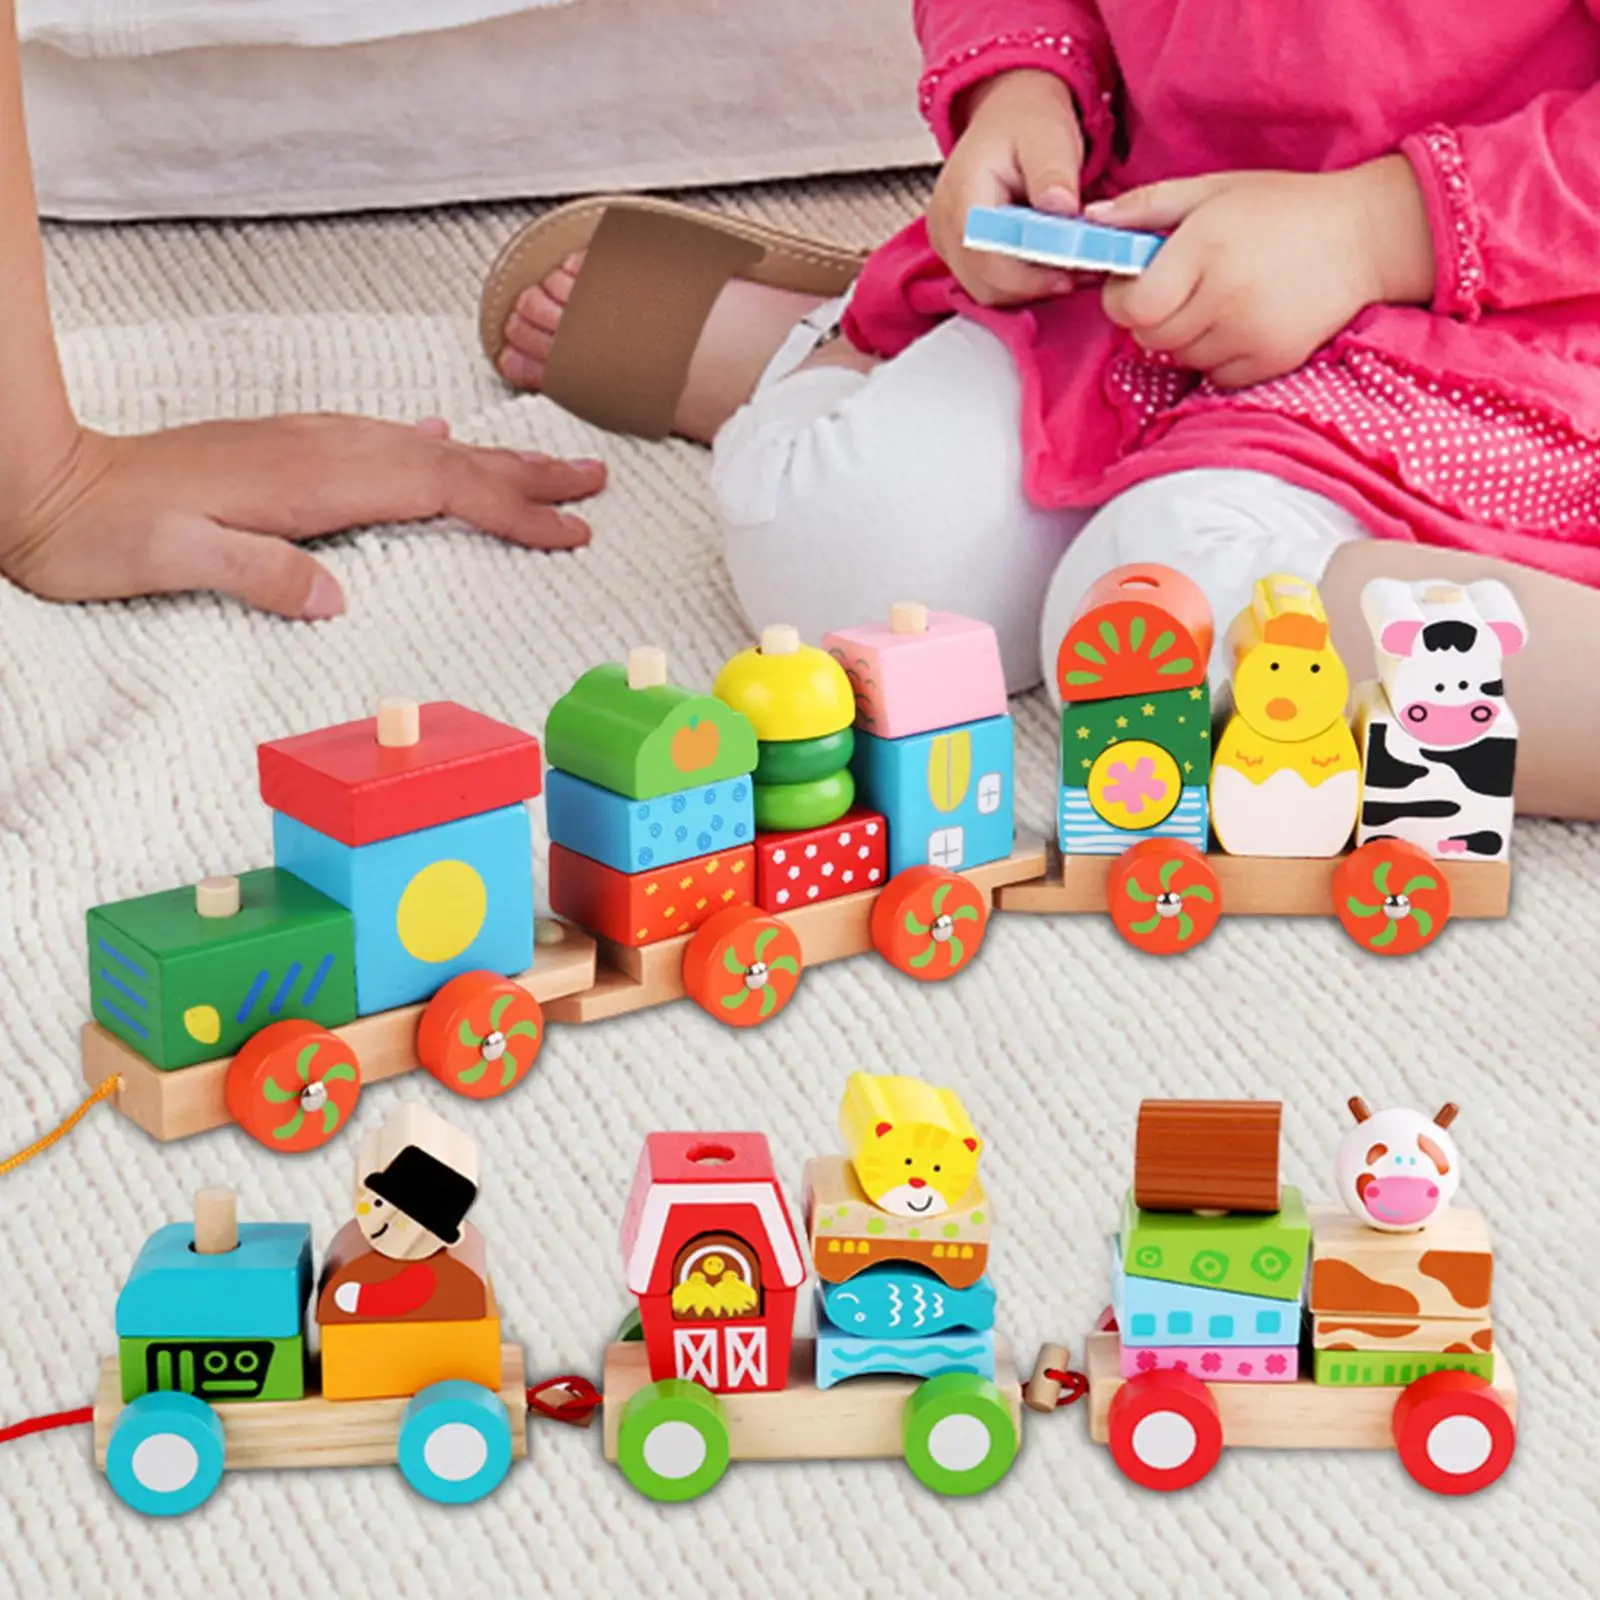 Stacking Train Toy, Wooden Small Trains, Fun Smooth Wooden Train Set, Classic Wooden Toddler Toy, for Christmas Birthday